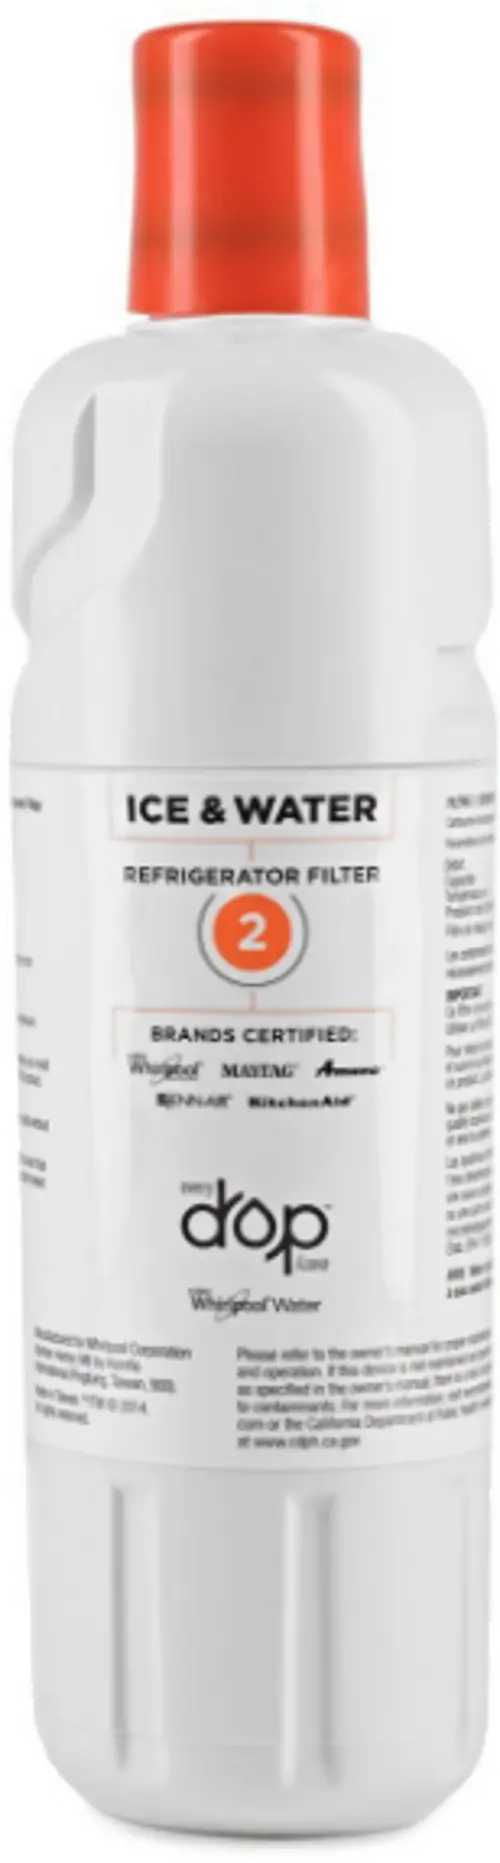 https://static.rcwilley.com/products/4616677/Whirlpool-Refrigerator-Everydrop-Water-Filter-EDR2RXD1-rcwilley-image1~500.webp?r=13